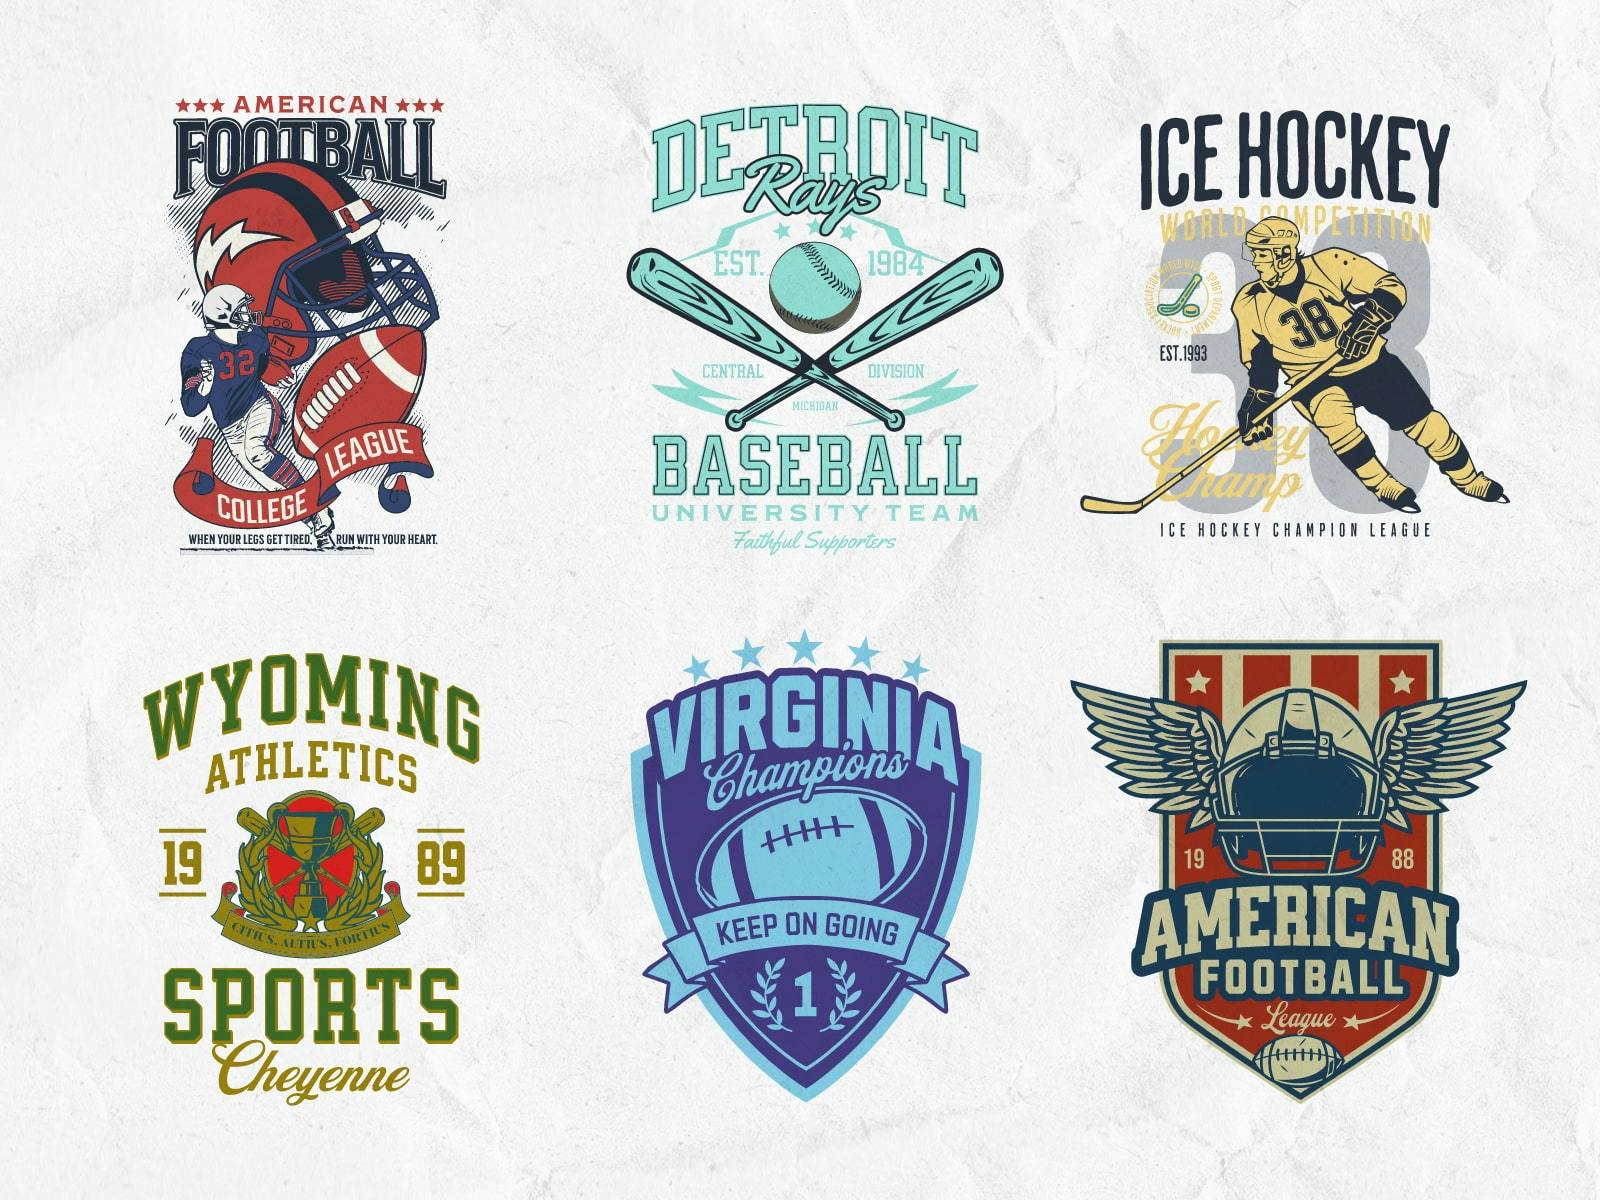 Retro Sport College T-Shirt: Collection of retro sport college-themed T-shirt designs